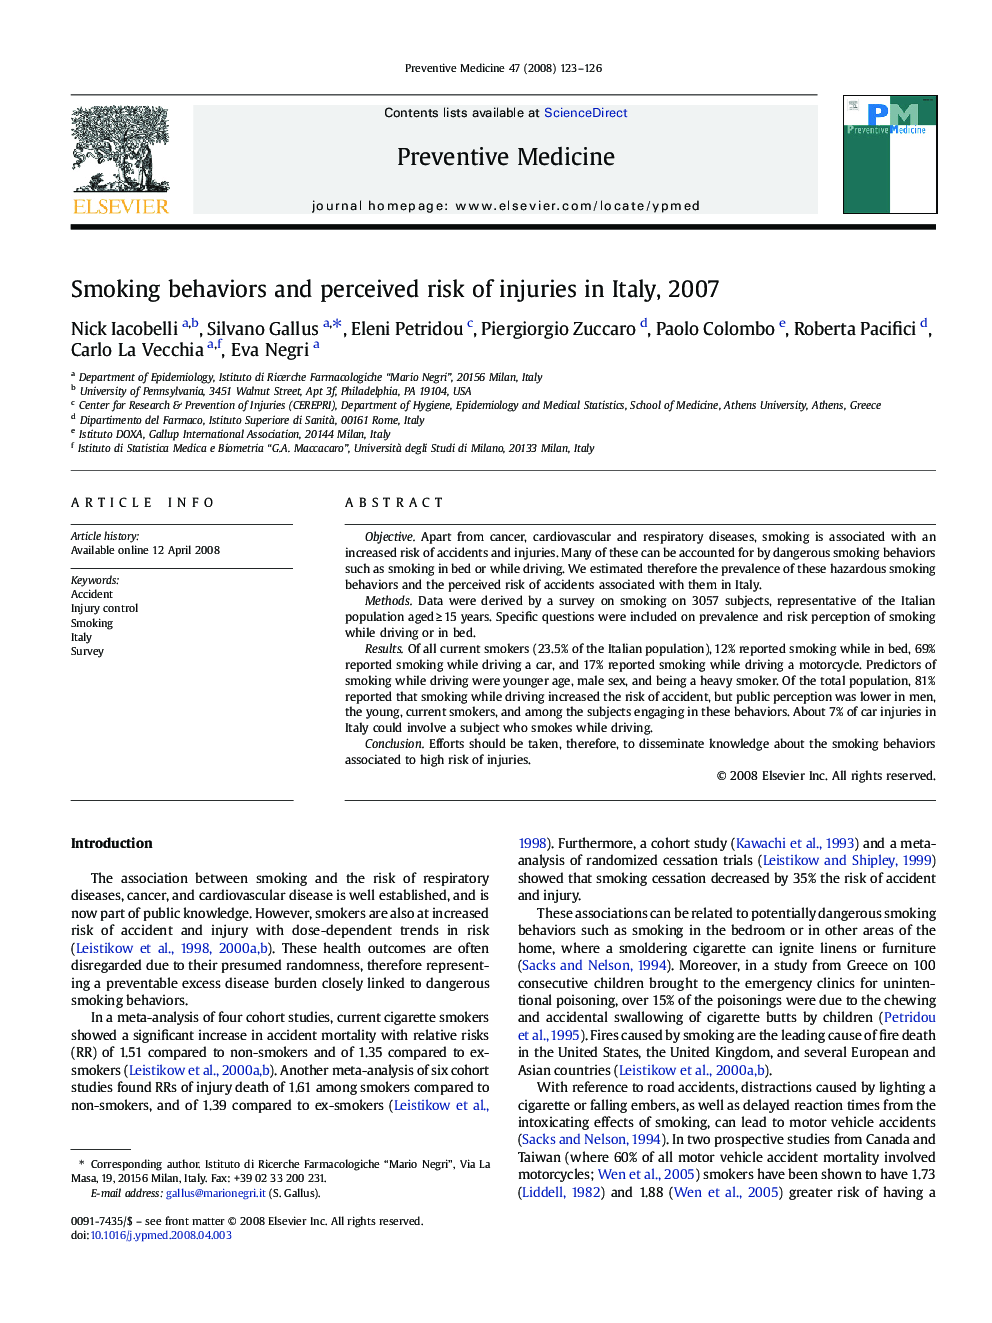 Smoking behaviors and perceived risk of injuries in Italy, 2007